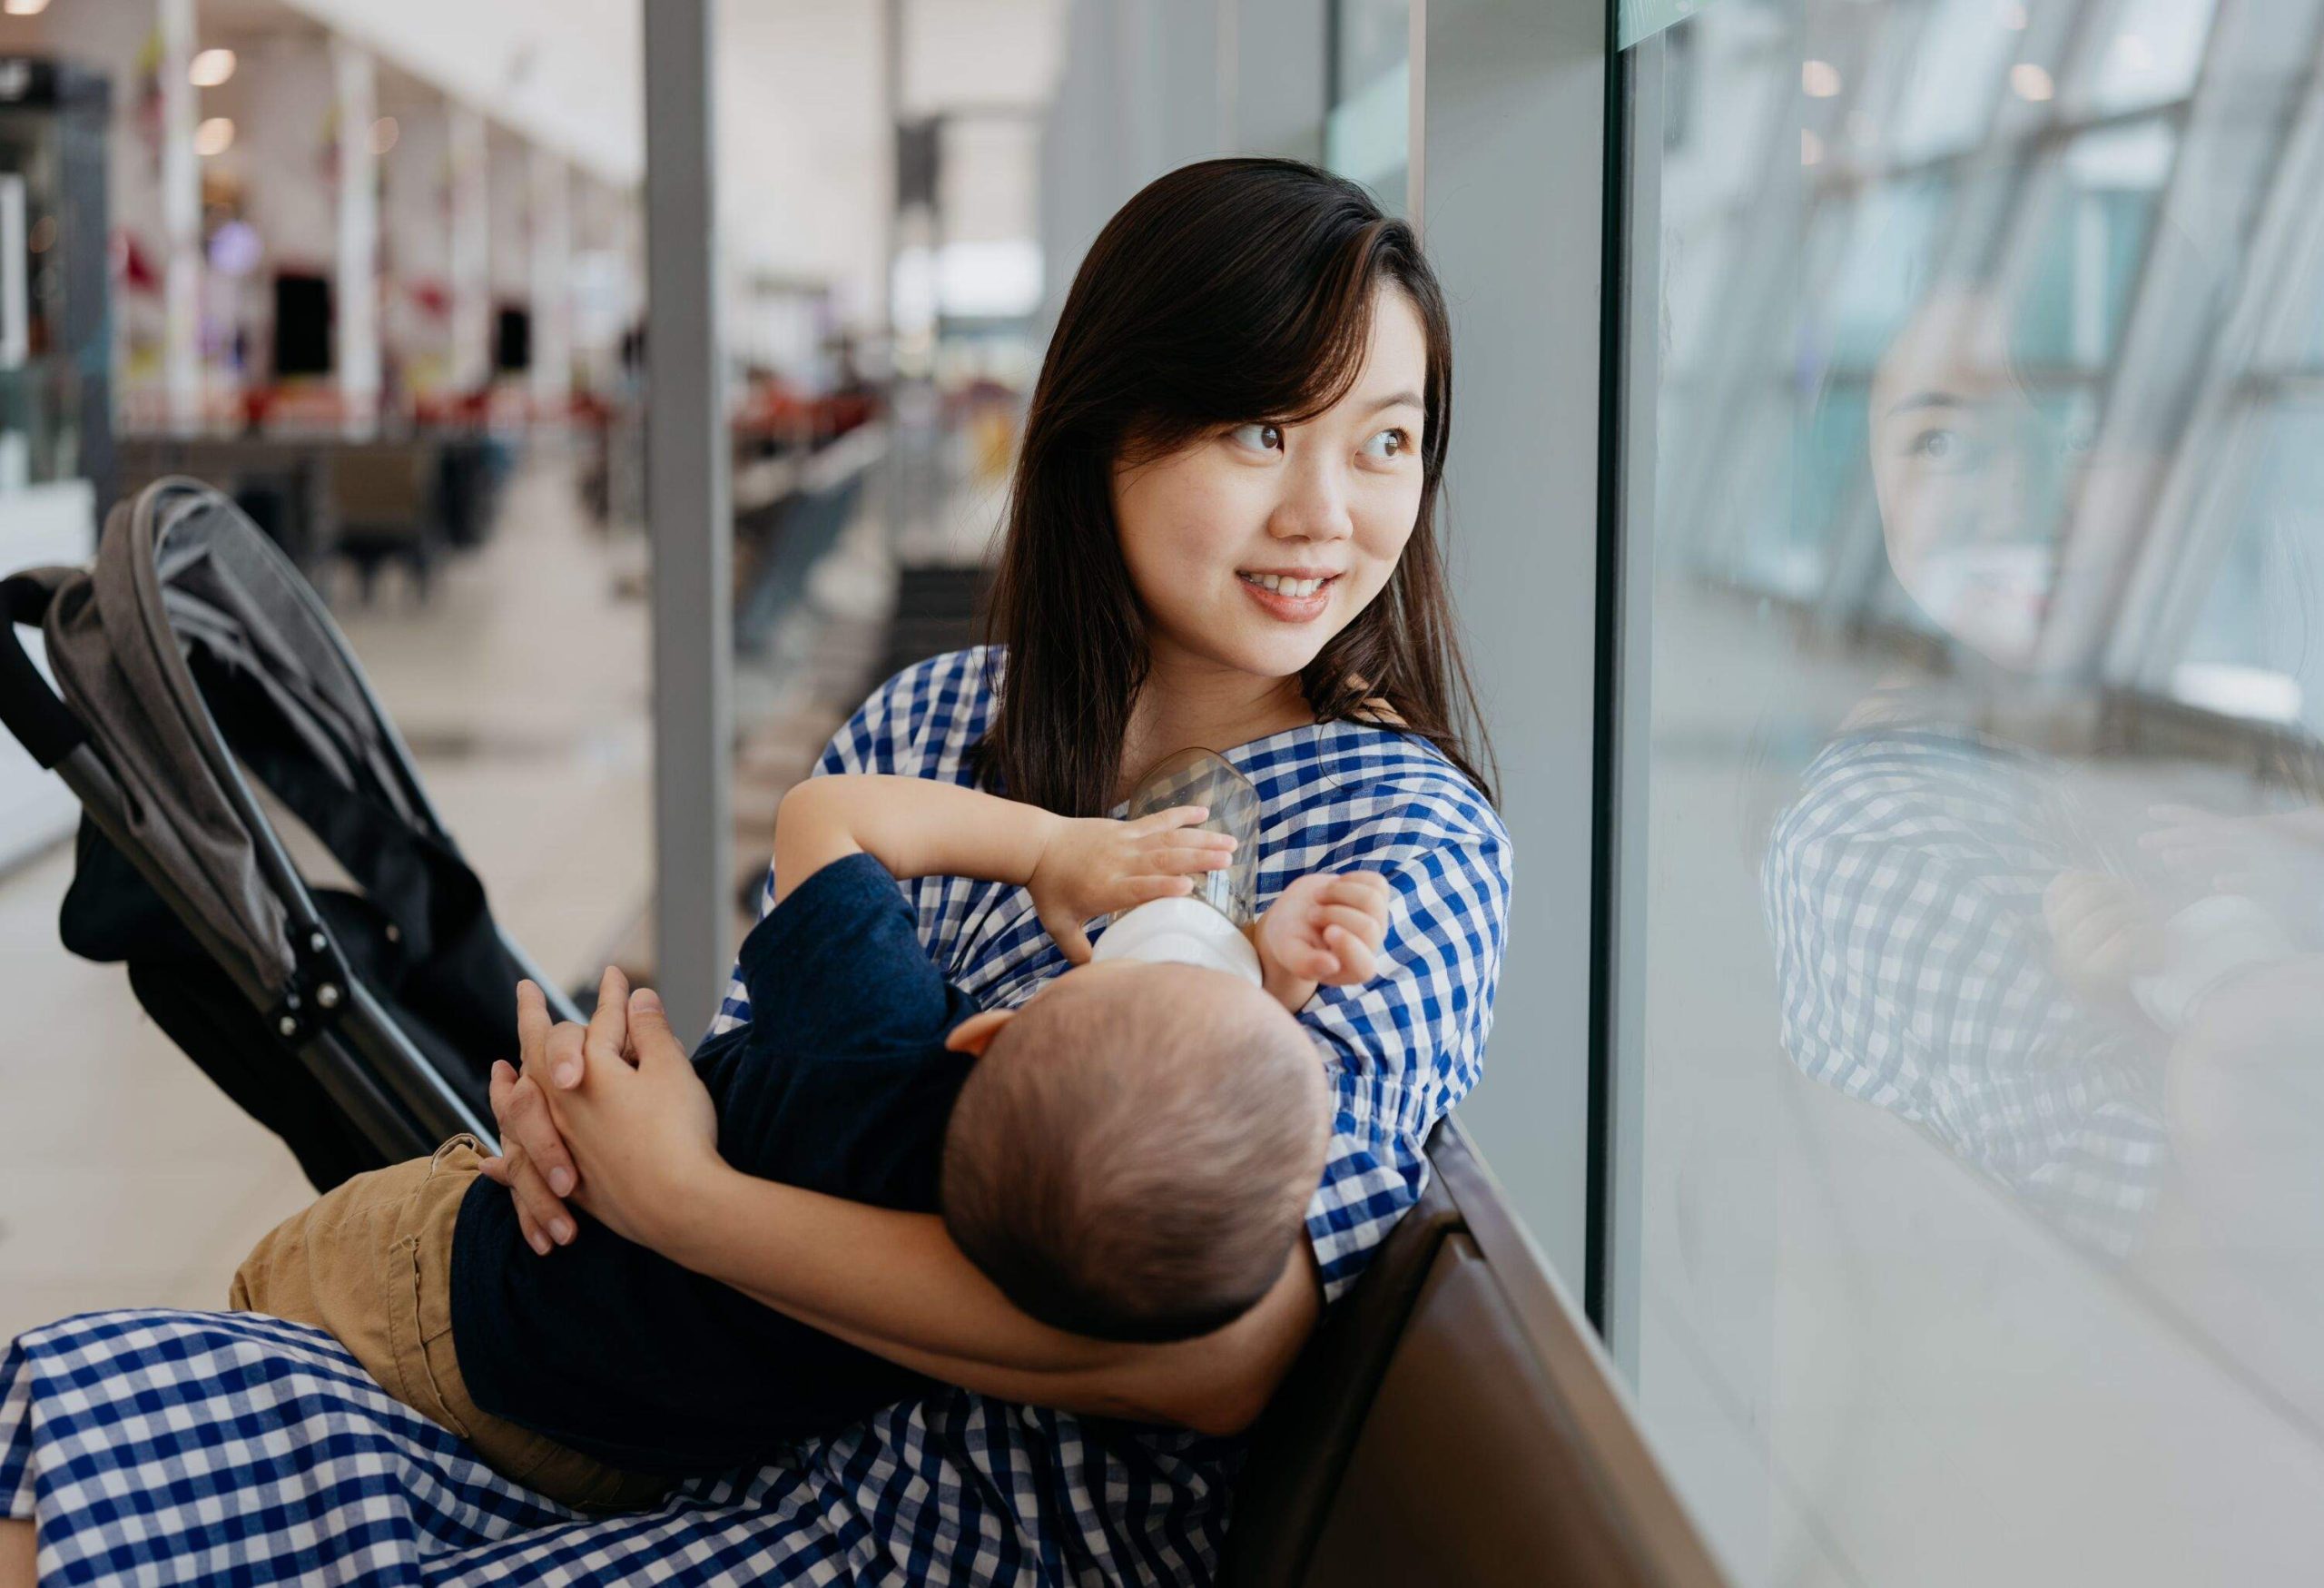 An woman feeding her baby while waiting for flight at the airport